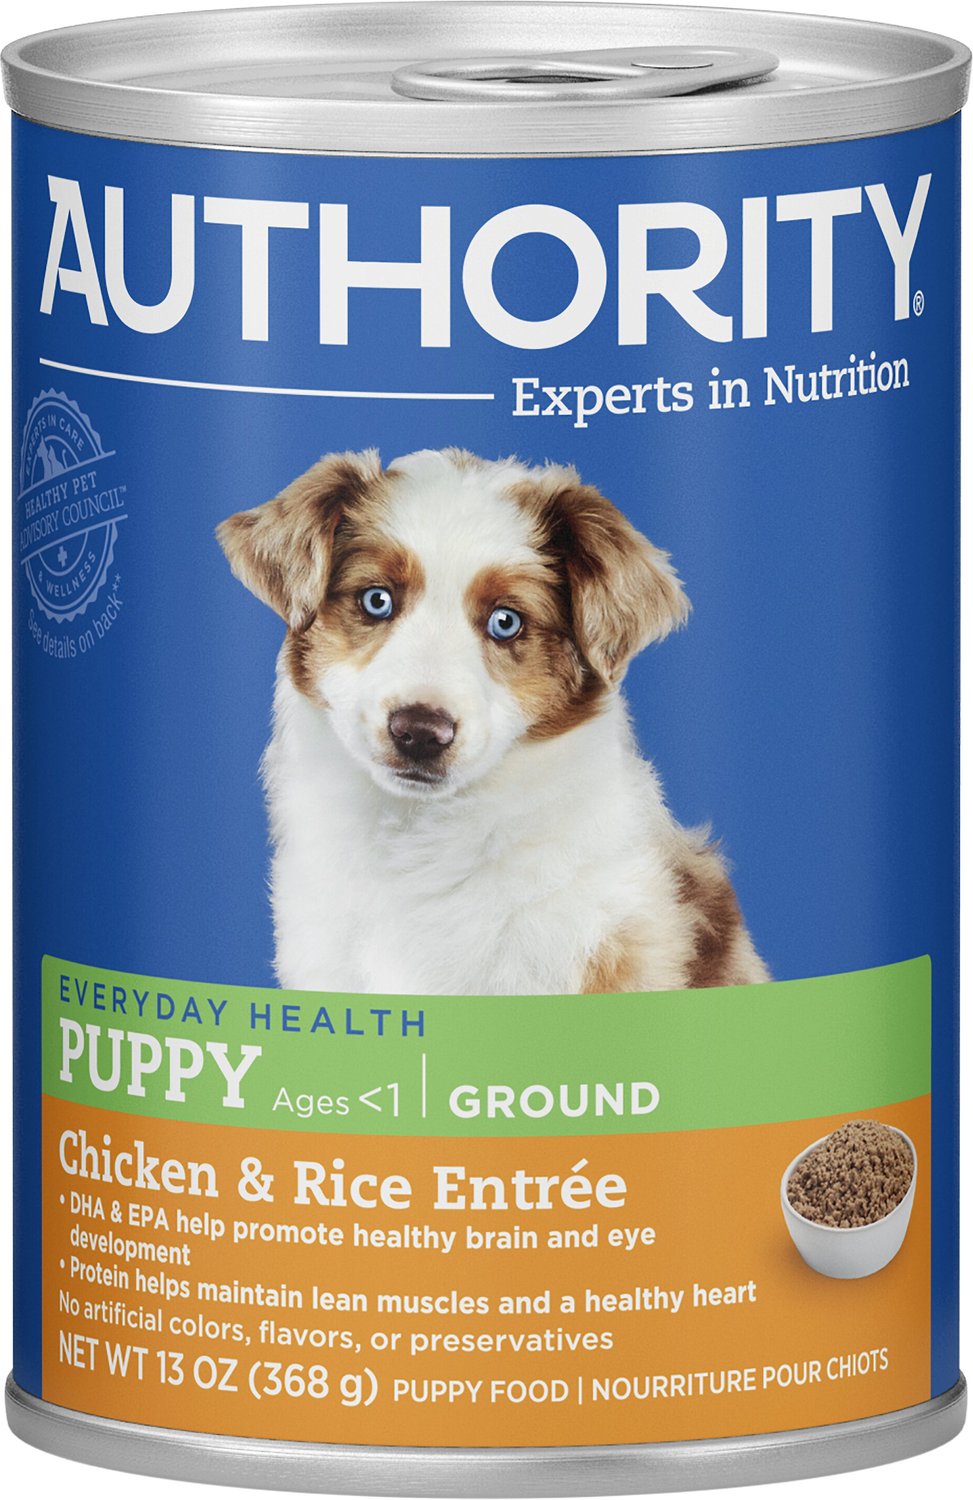 Authority Chicken Rice Entree Puppy Ground Canned Dog Food